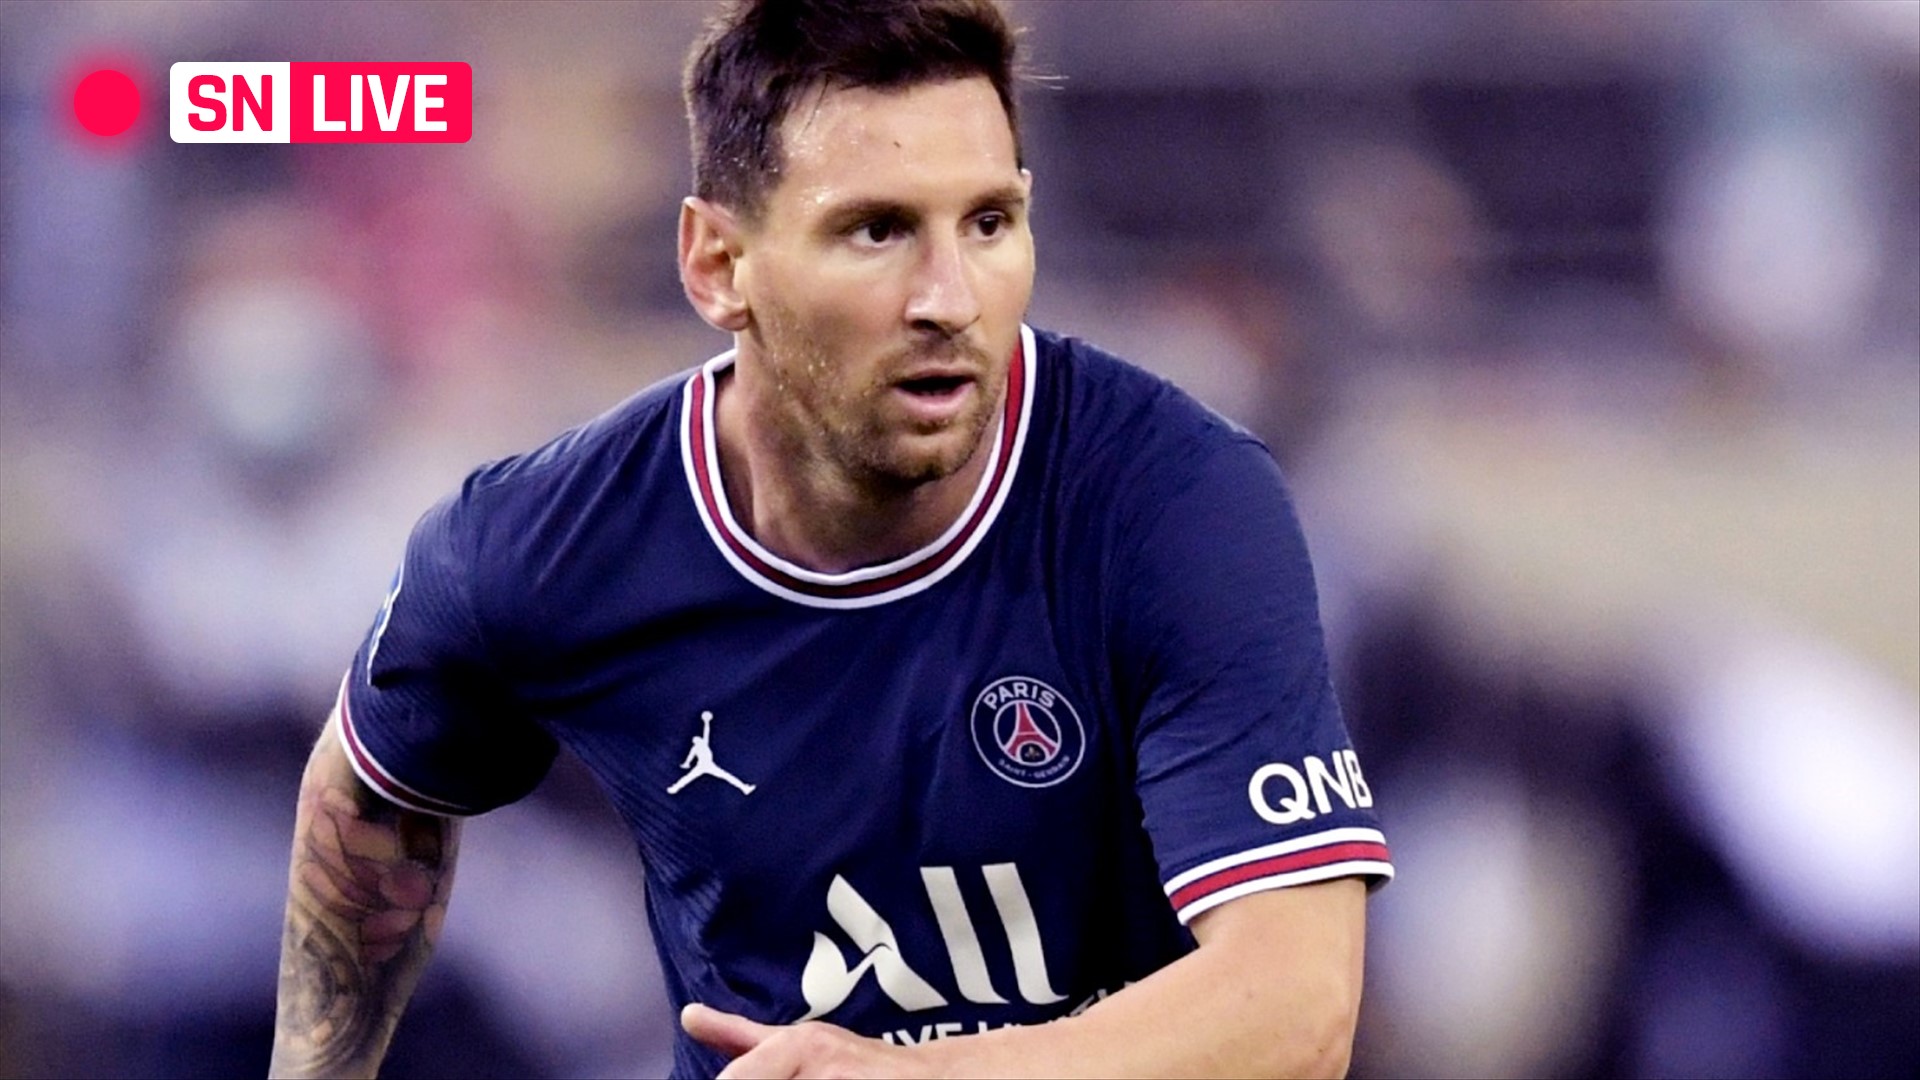 psg-vs.-losc-lille-result:-lionel-messi-subbed-at-halftime,-but-psg-comes-back-to-win